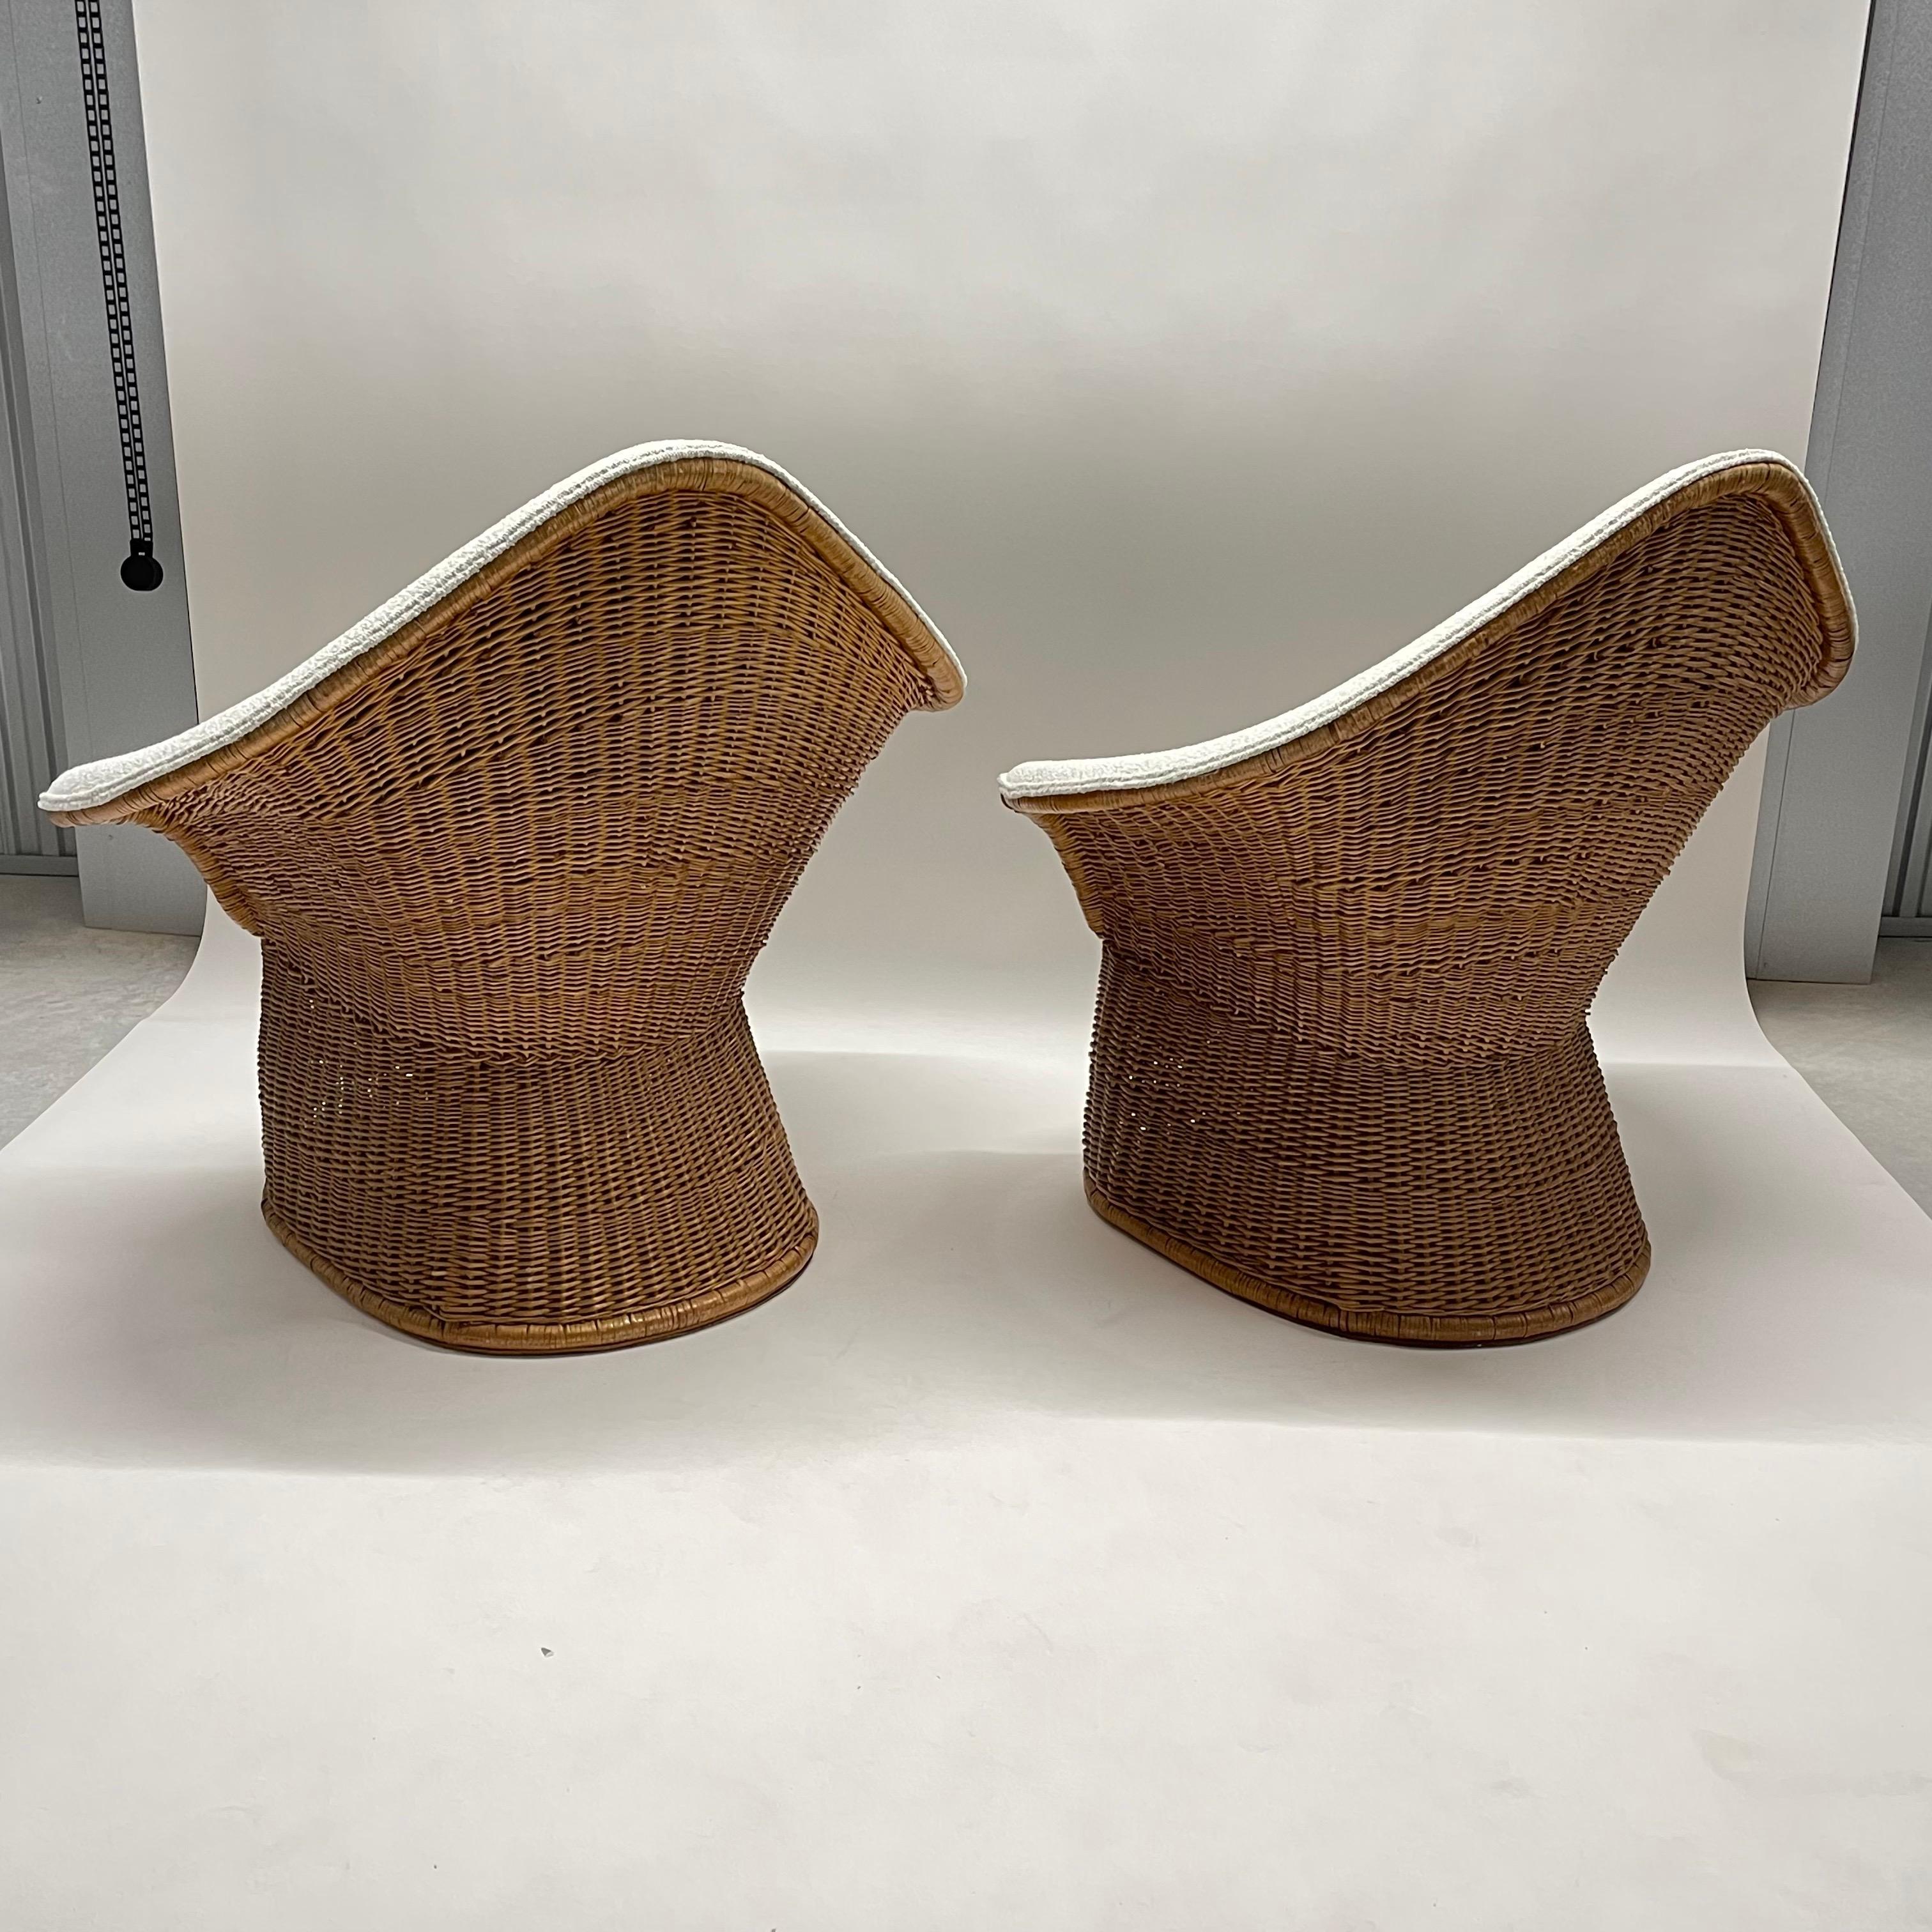 Bouclé Rare Pair of Wicker Rattan and Boucle Sculptural Chairs, Italy, circa 1970's